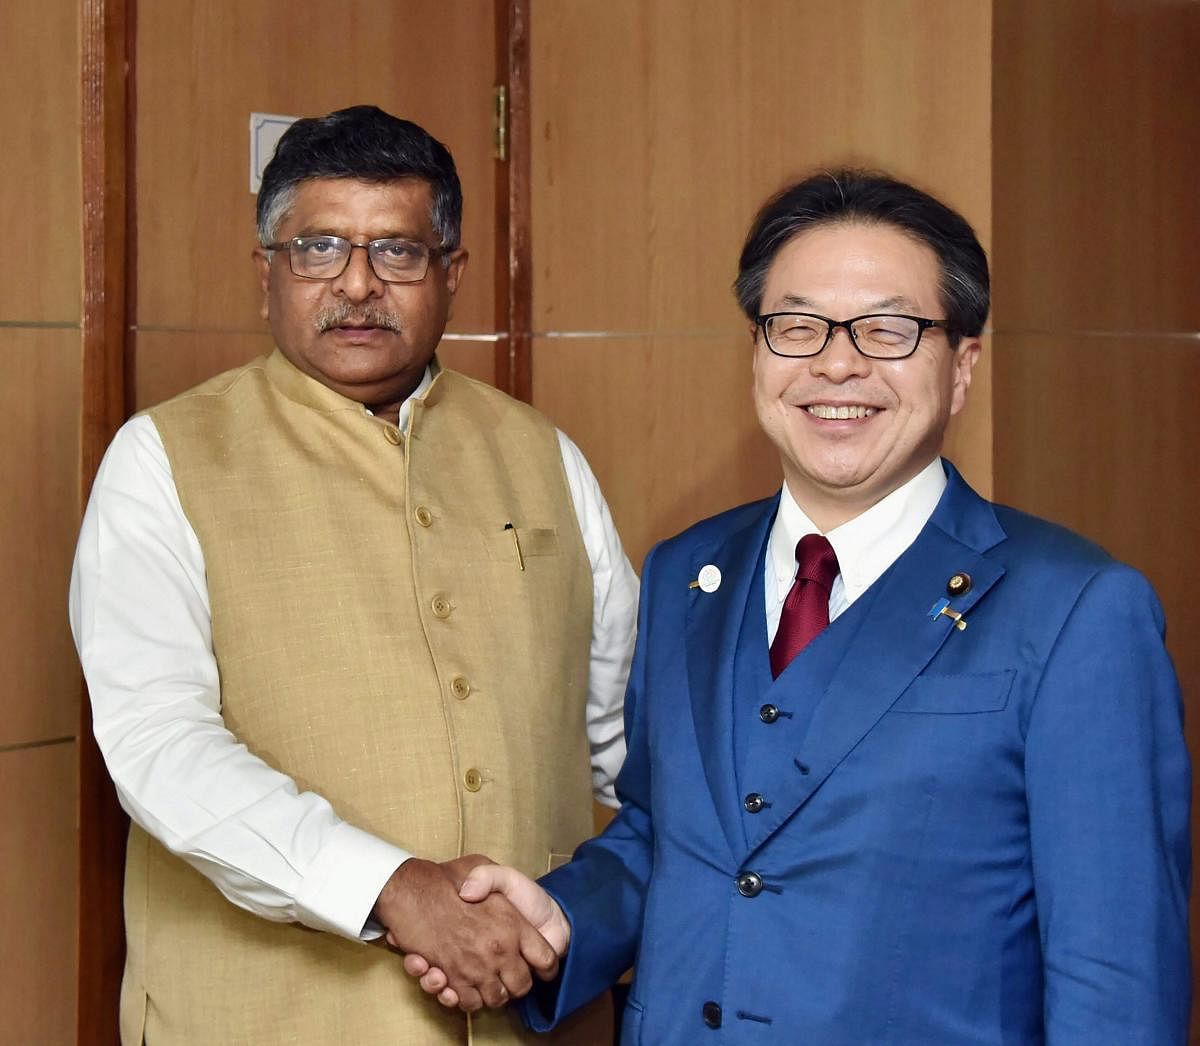 Minister of Economy Trade and Industry, Japan, Hiroshige Seko meets with the Union Minister for Electronics &amp; Information Technology and Law &amp; Justice, Ravi Shankar Prasad in New Delhi on Tuesday. PTI Photo